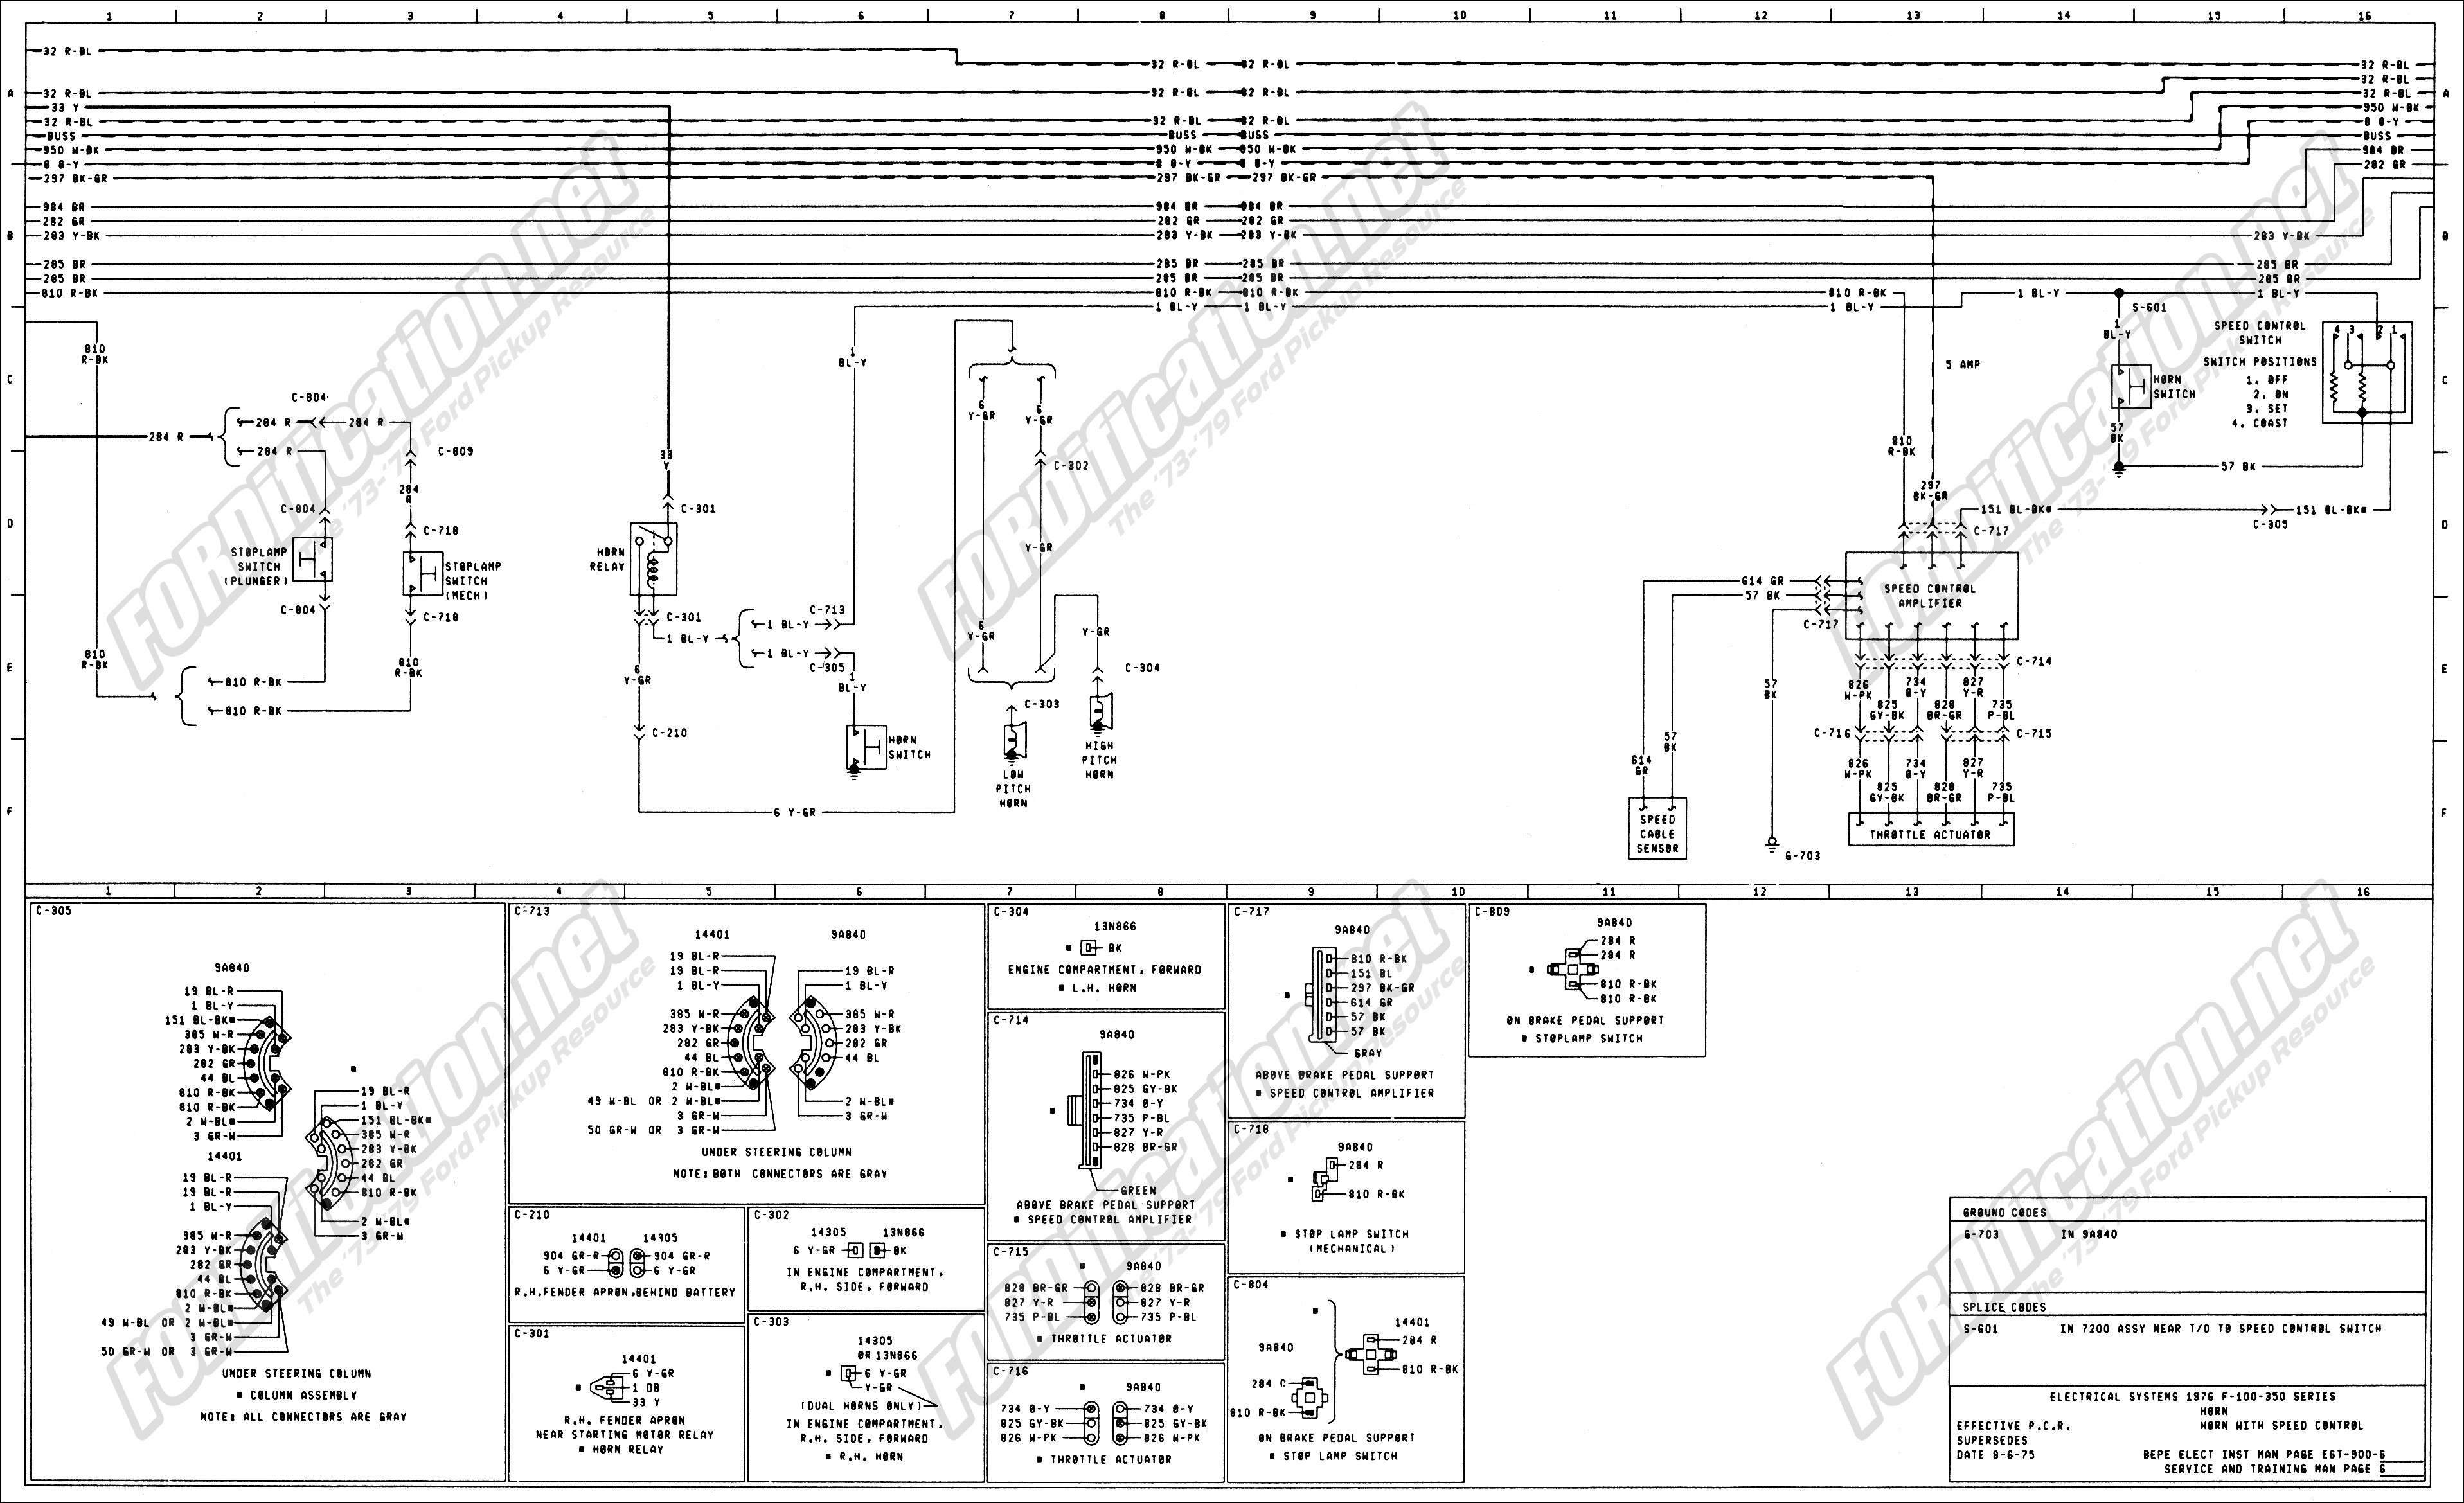 Wiring Diagram for ford F150 Trailer Lights From Truck 1973 1979 ford Truck Wiring Diagrams & Schematics fordification Of Wiring Diagram for ford F150 Trailer Lights From Truck